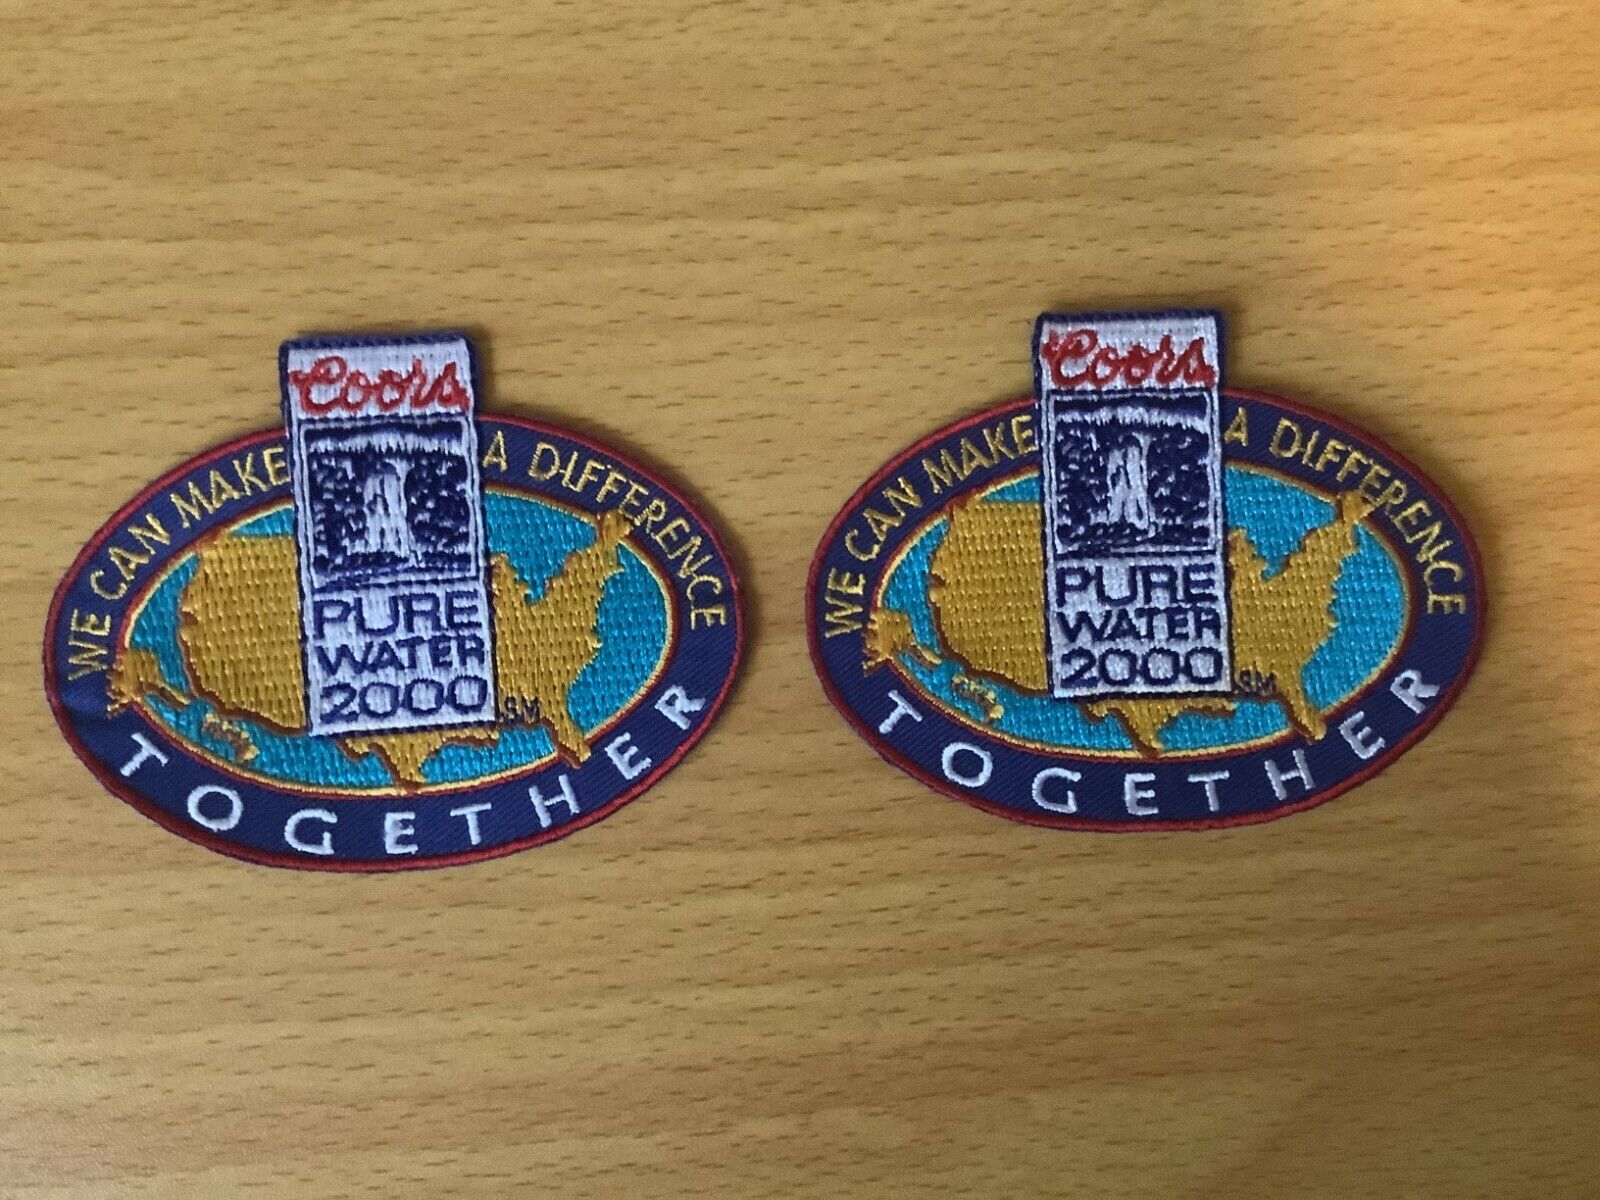 2 Coors Pure Water 2000 We Can Make A Difference Together Patches Rare